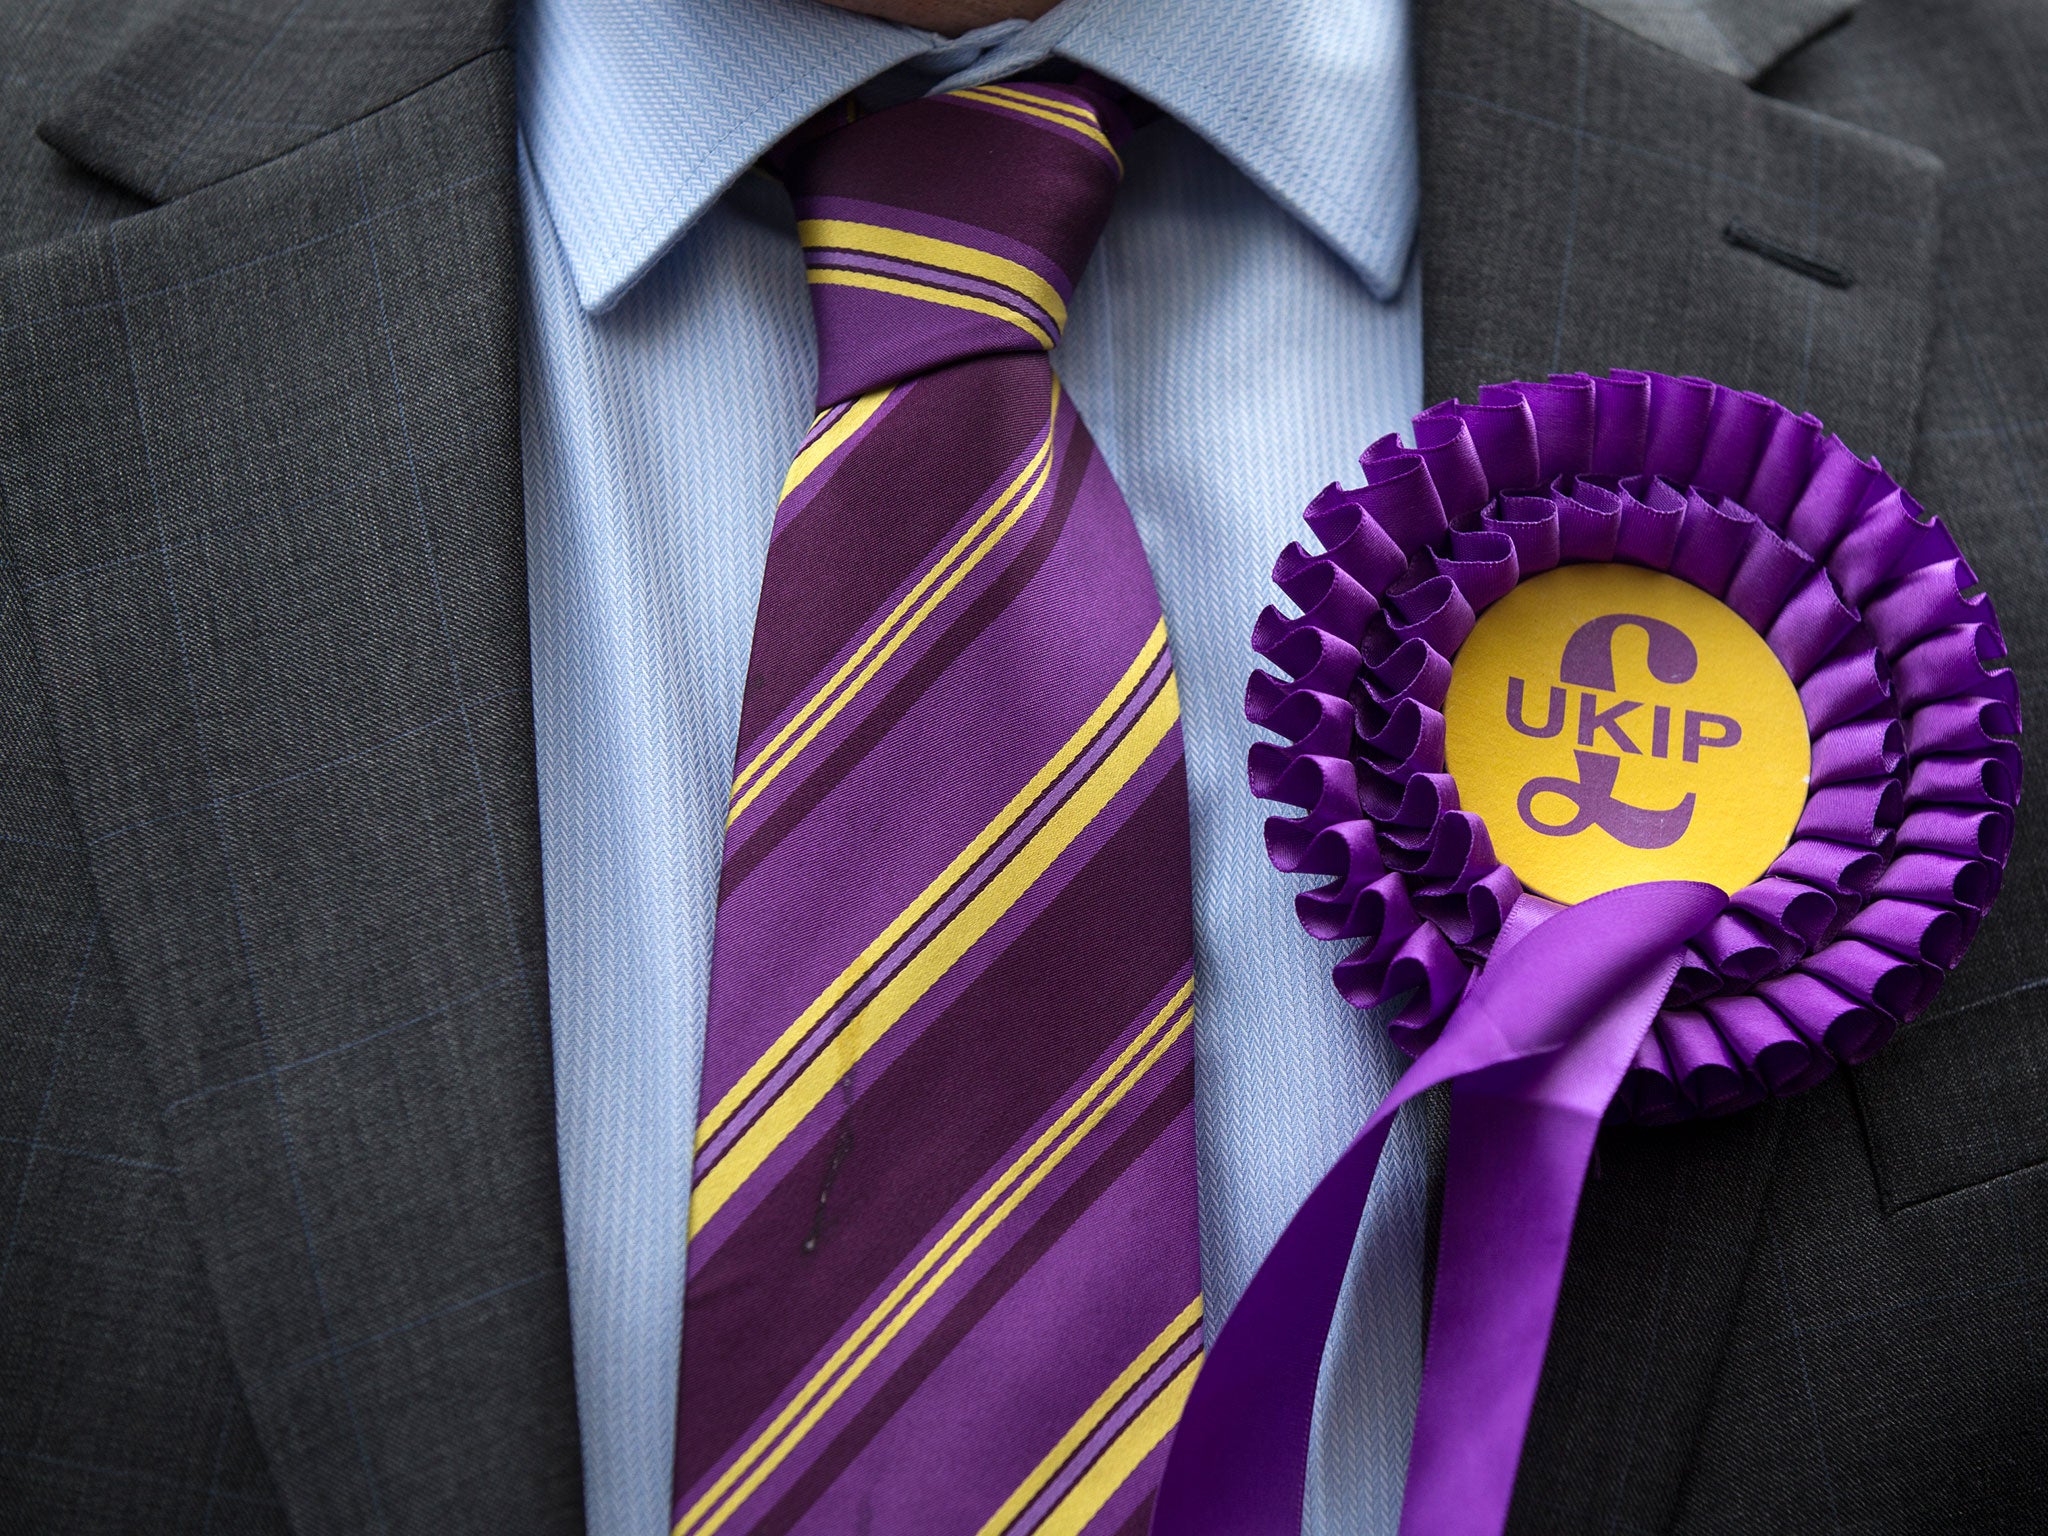 A supporter of the UK Independence Party (UKIP) wears a UKIP tie and rosette.